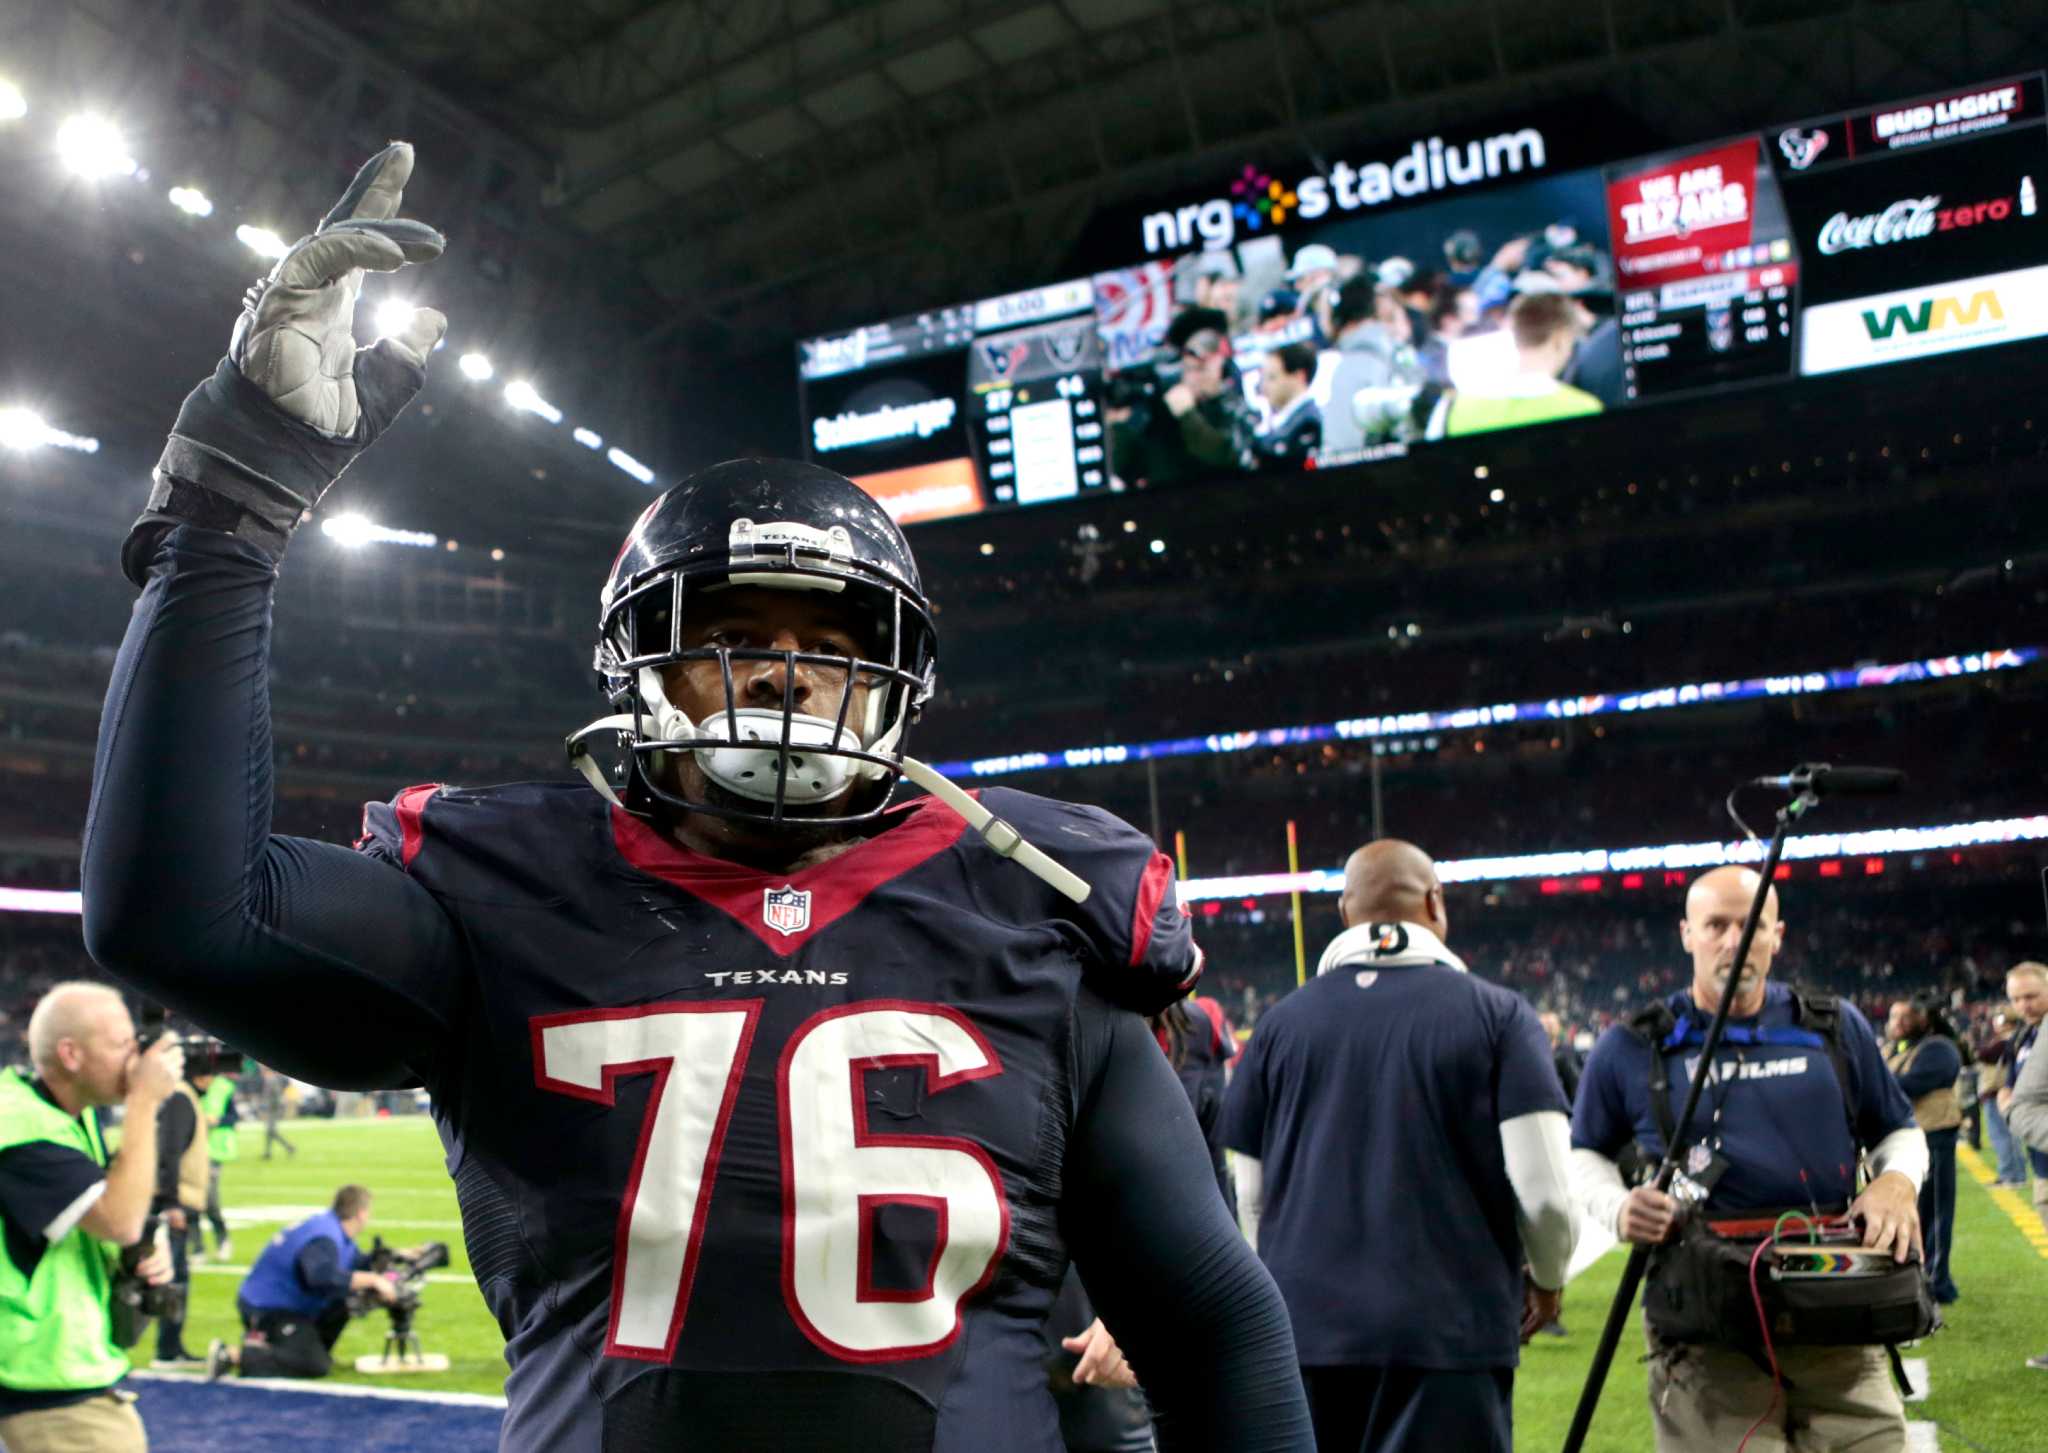 Offensive tackle Duane Brown reports to Texans practice